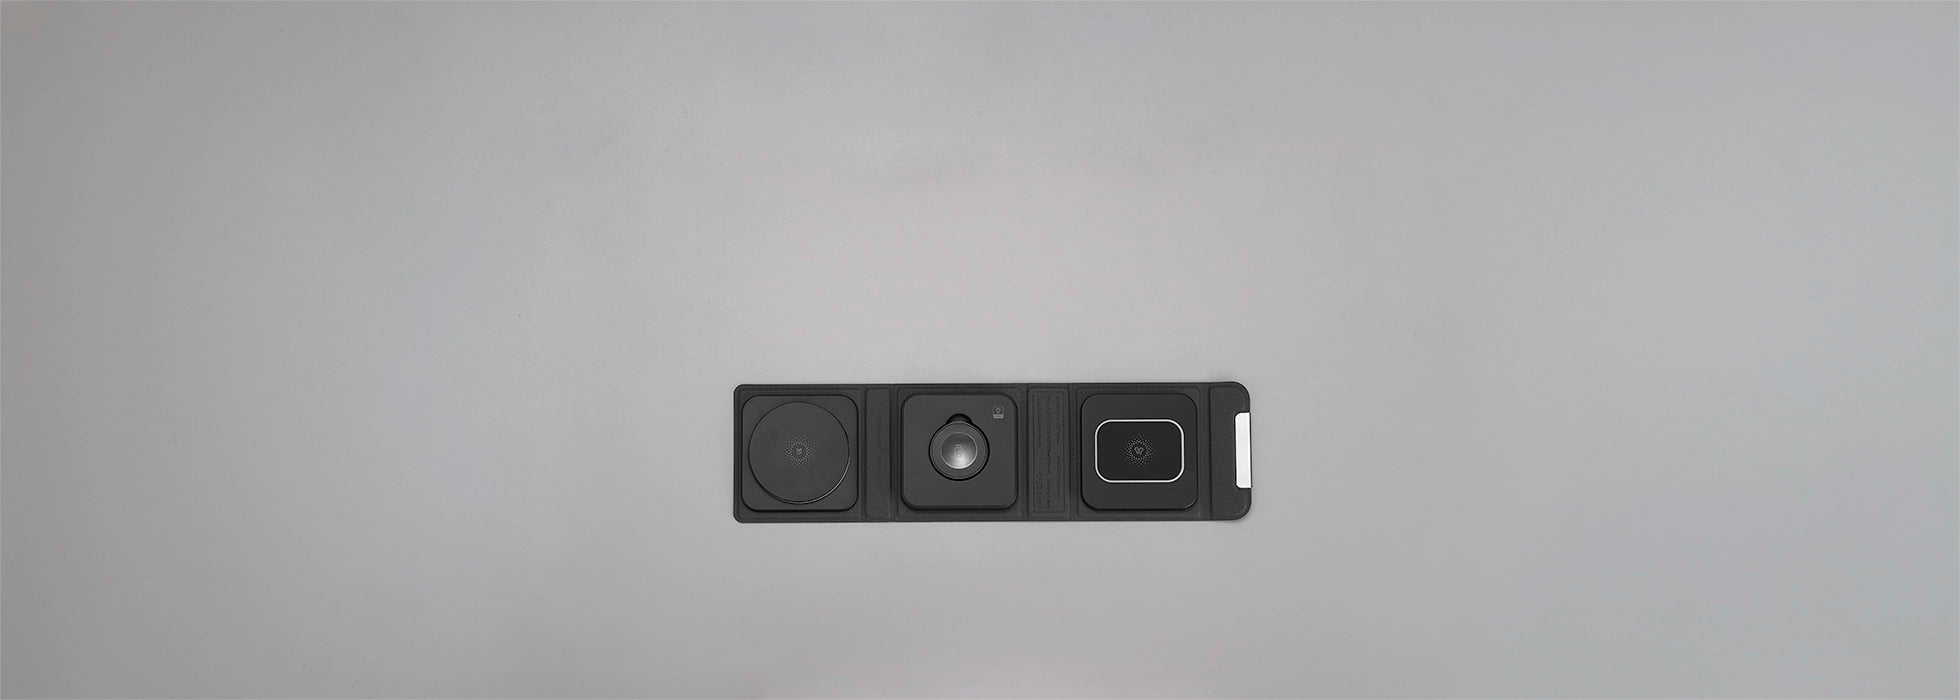 Modern Standard Cubica Charger in grey background